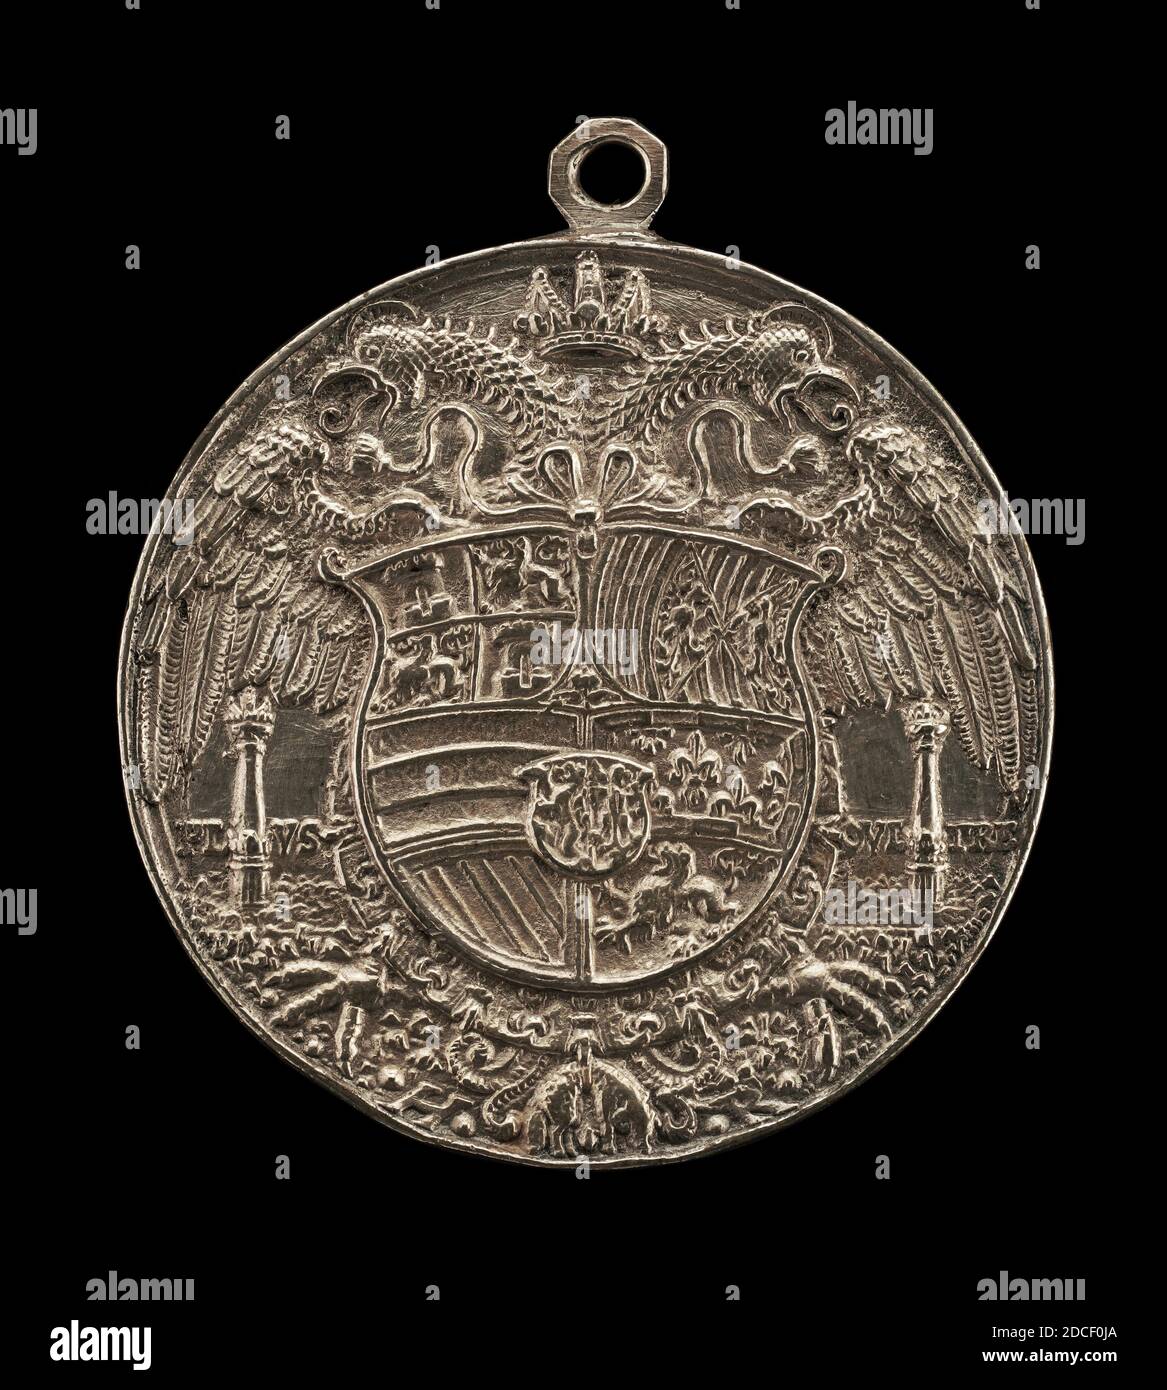 Hans Reinhart the Elder, (artist), German, c. 1510 - 1581, Double-headed Eagle, Charged with Shield, 1537, silver/With loop, overall (height with suspension loop): 7.16 cm (2 13/16 in.), overall (diameter without loop): 6.38 cm (2 1/2 in.), gross weight: 58.31 gr (0.129 lb.), axis: 12:00 Stock Photo